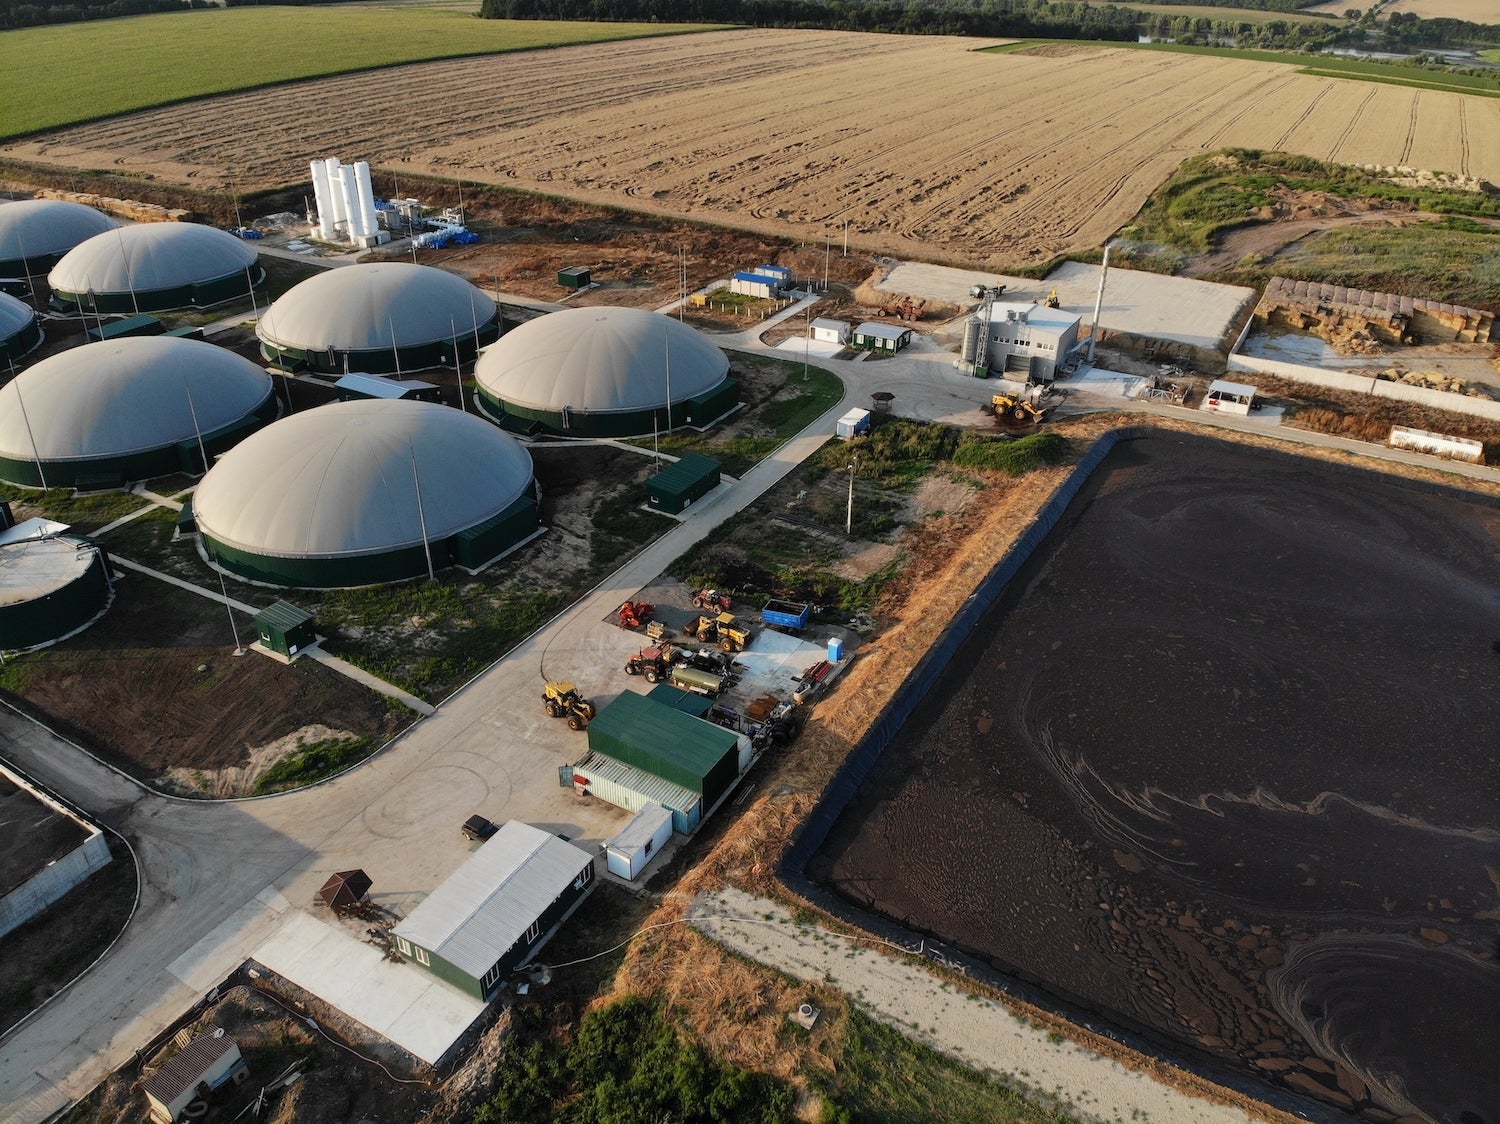 EPA accepts complaint challenging biogas project near Seaford